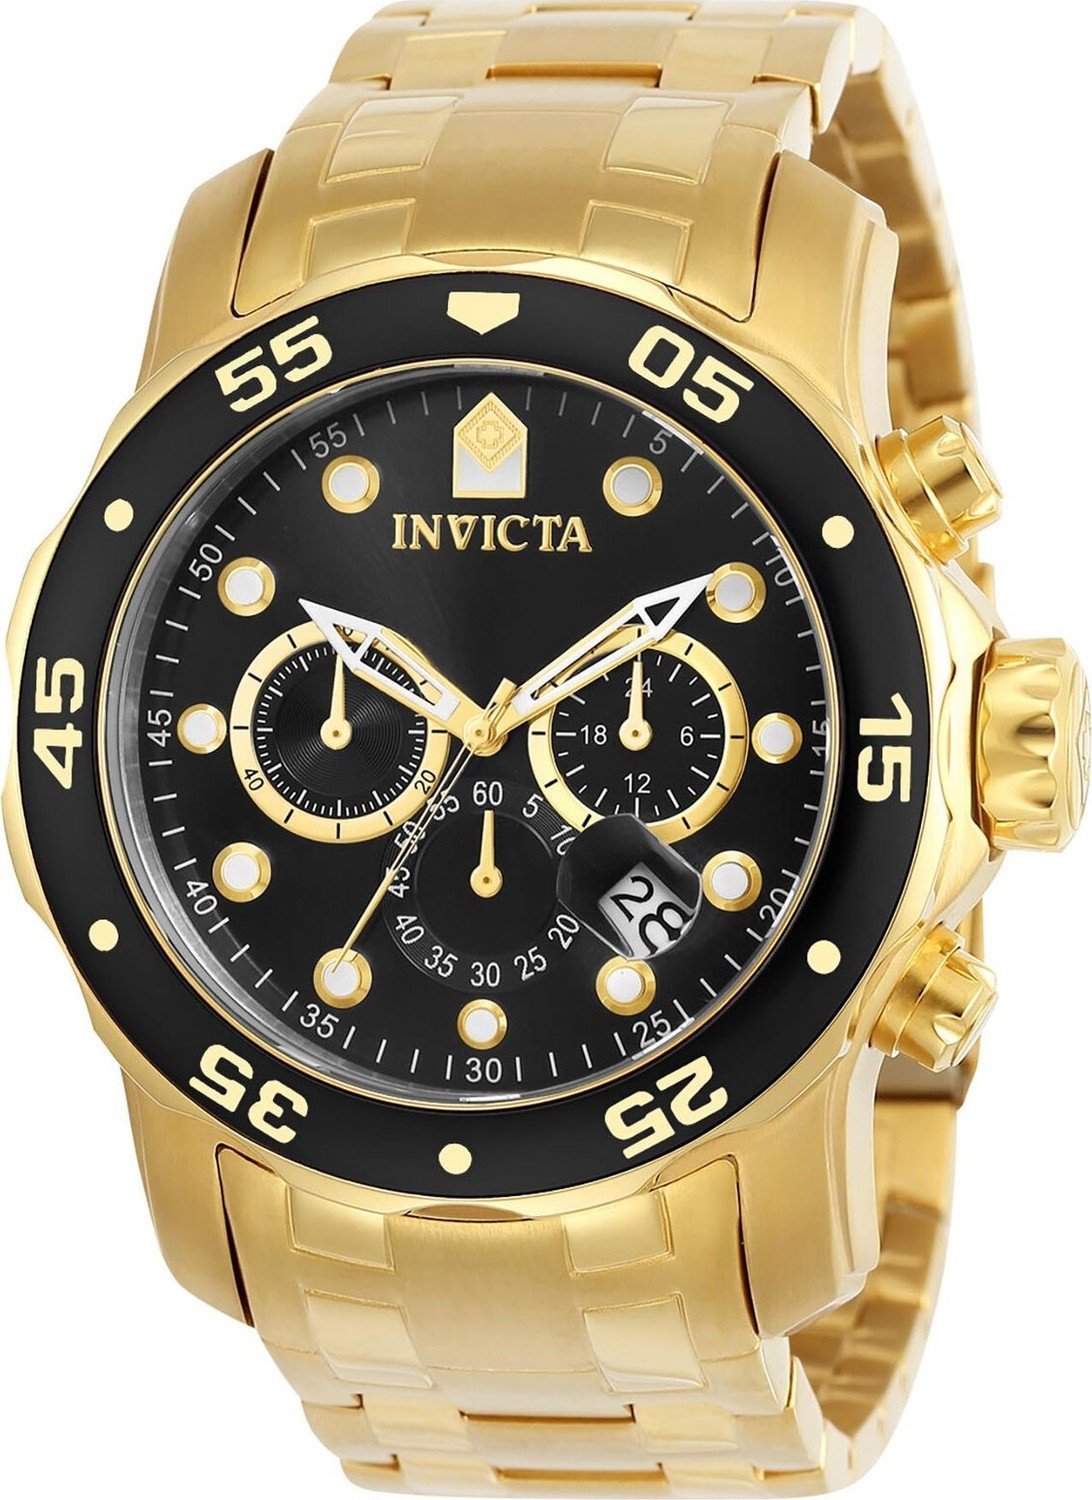 Hodinky Invicta Watch Pro Diver IN0072 Gold